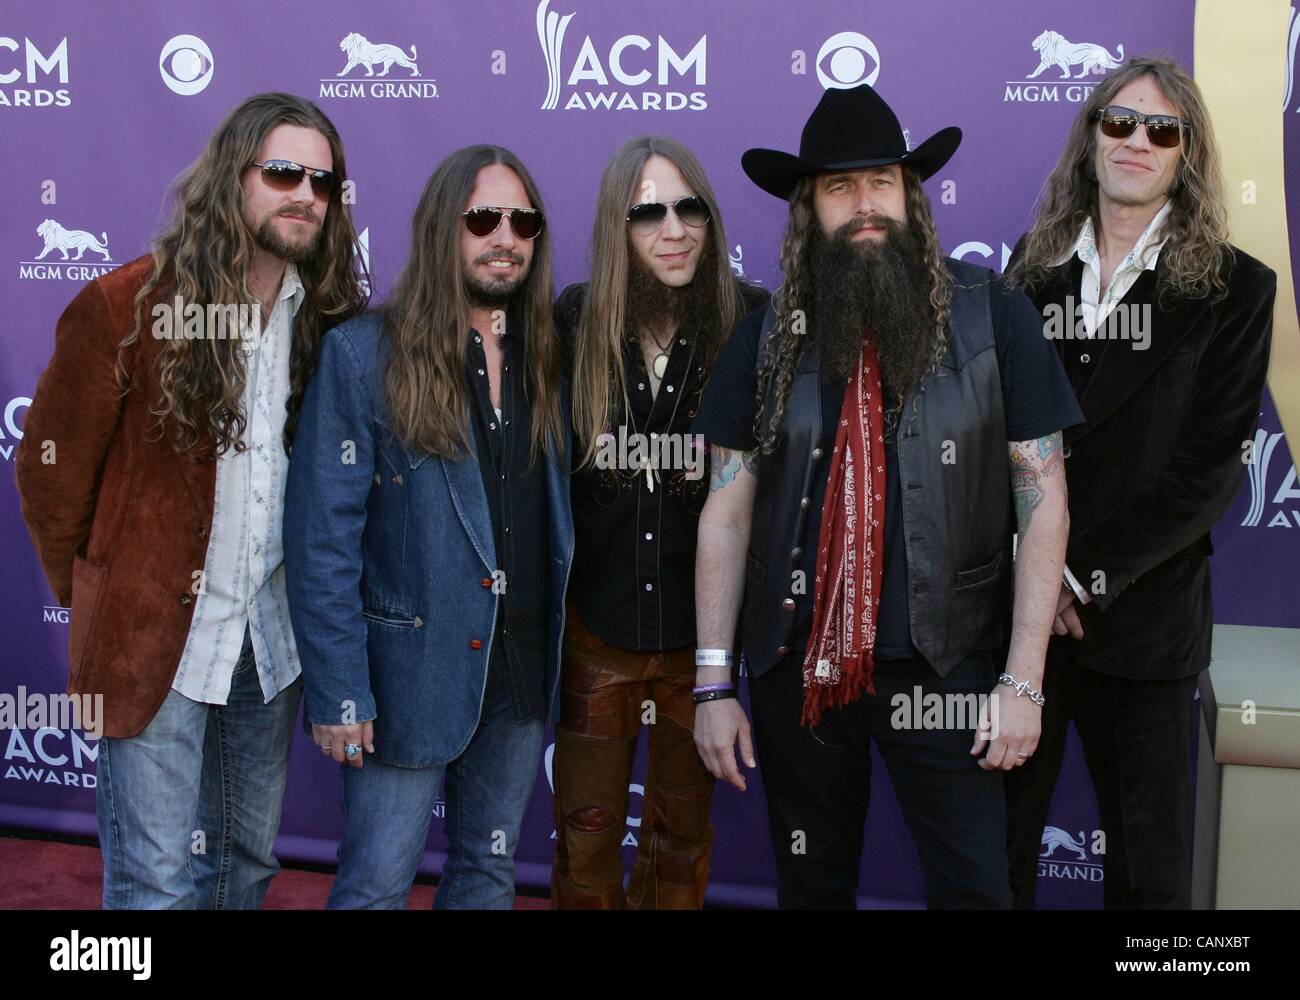 Brandon Still, Paul Jackson, Charlie Starr, Brit Turner, Richard Turner of Blackberry Smoke at arrivals for 47th Annual Academy of Country Music (ACM) Awards - ARRIVALS 2, MGM Grand Garden Arena, Las Vegas, NV April 1, 2012. Photo By: James Atoa/Everett Collection Stock Photo